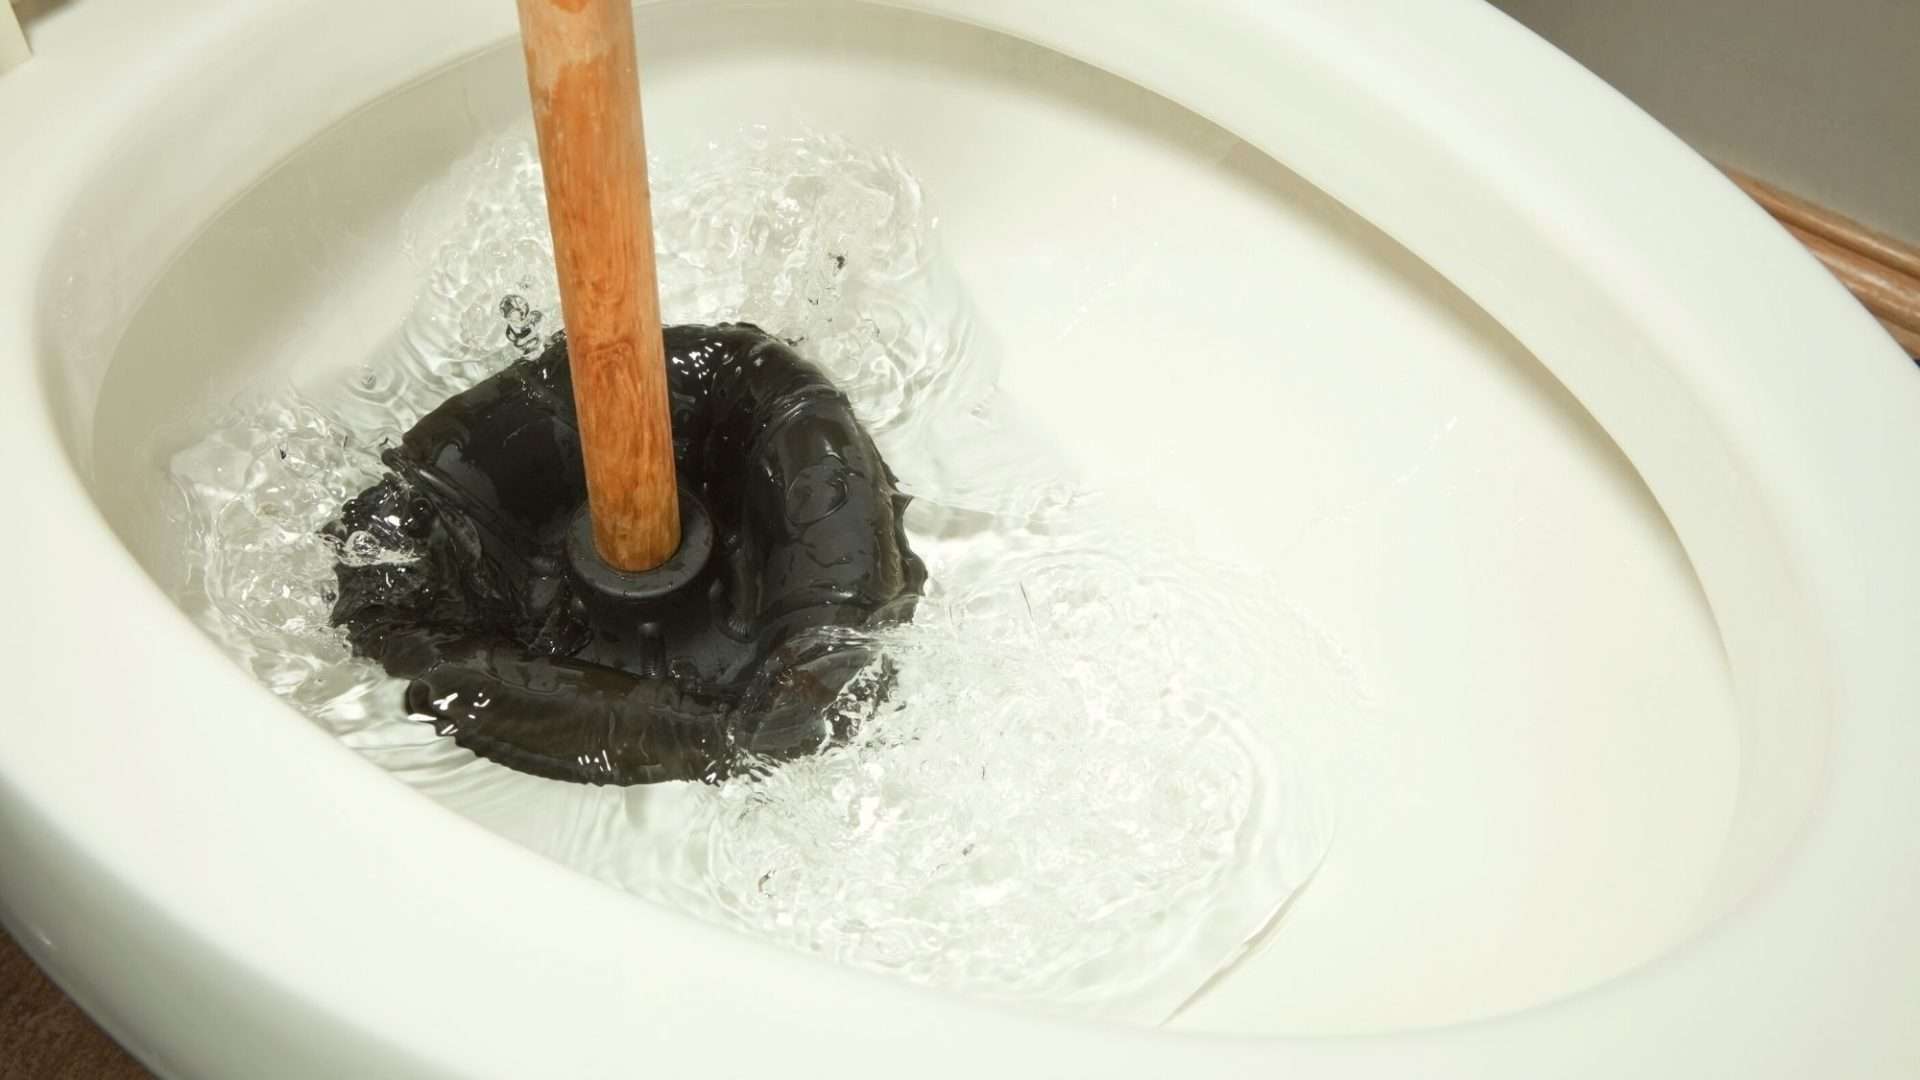 plunging an RV toilet